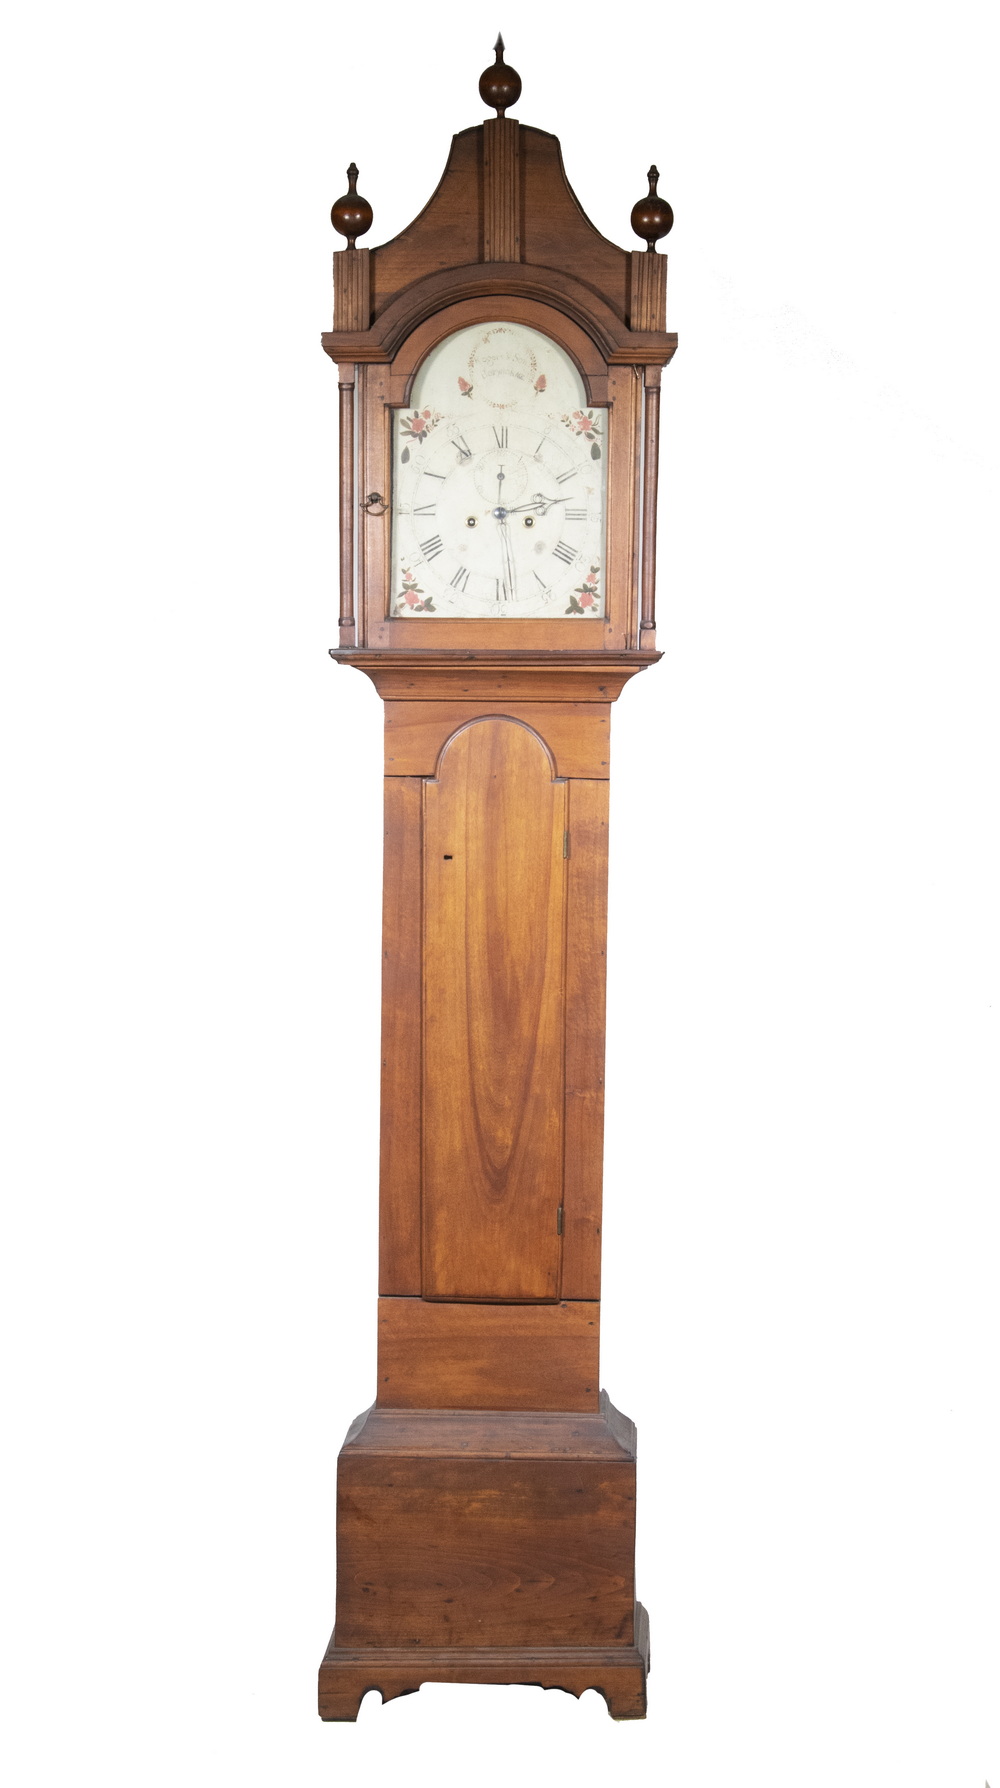 QUAKER COUNTRY TALL CLOCK BY ROGERS 2b4460